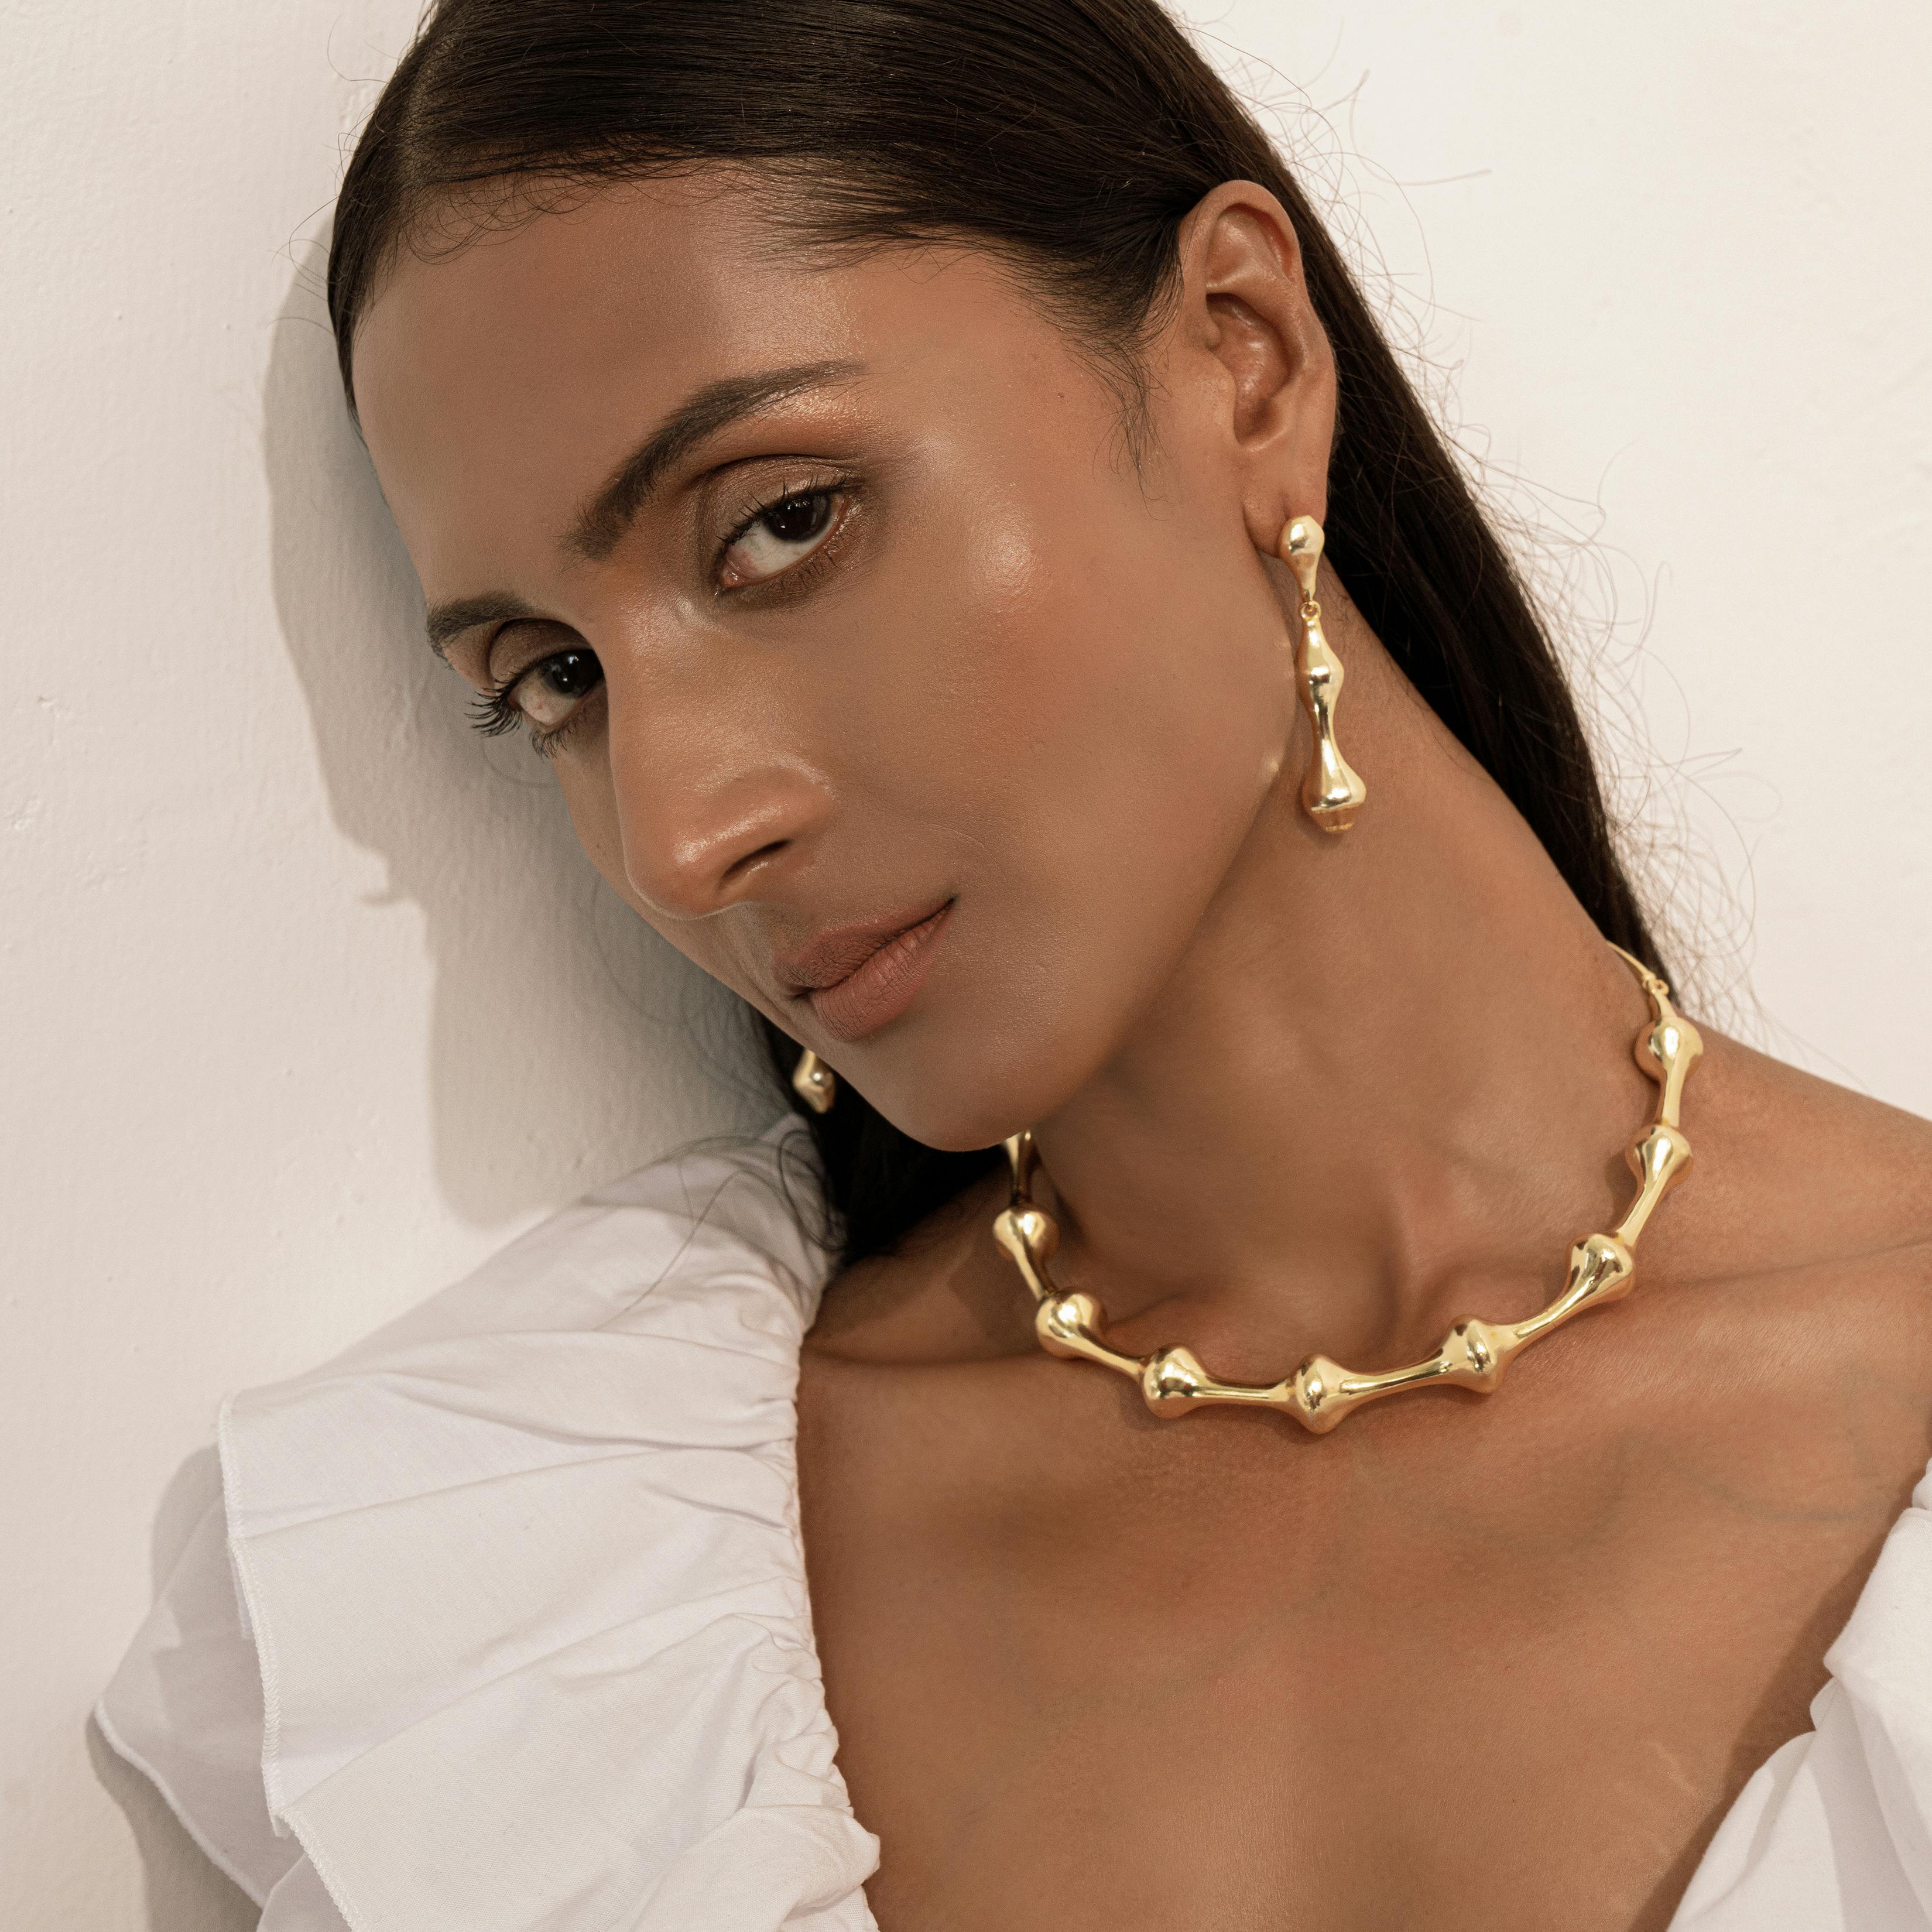 SYMPHONY CHOKER - GOLD TONE, a product by Equiivalence